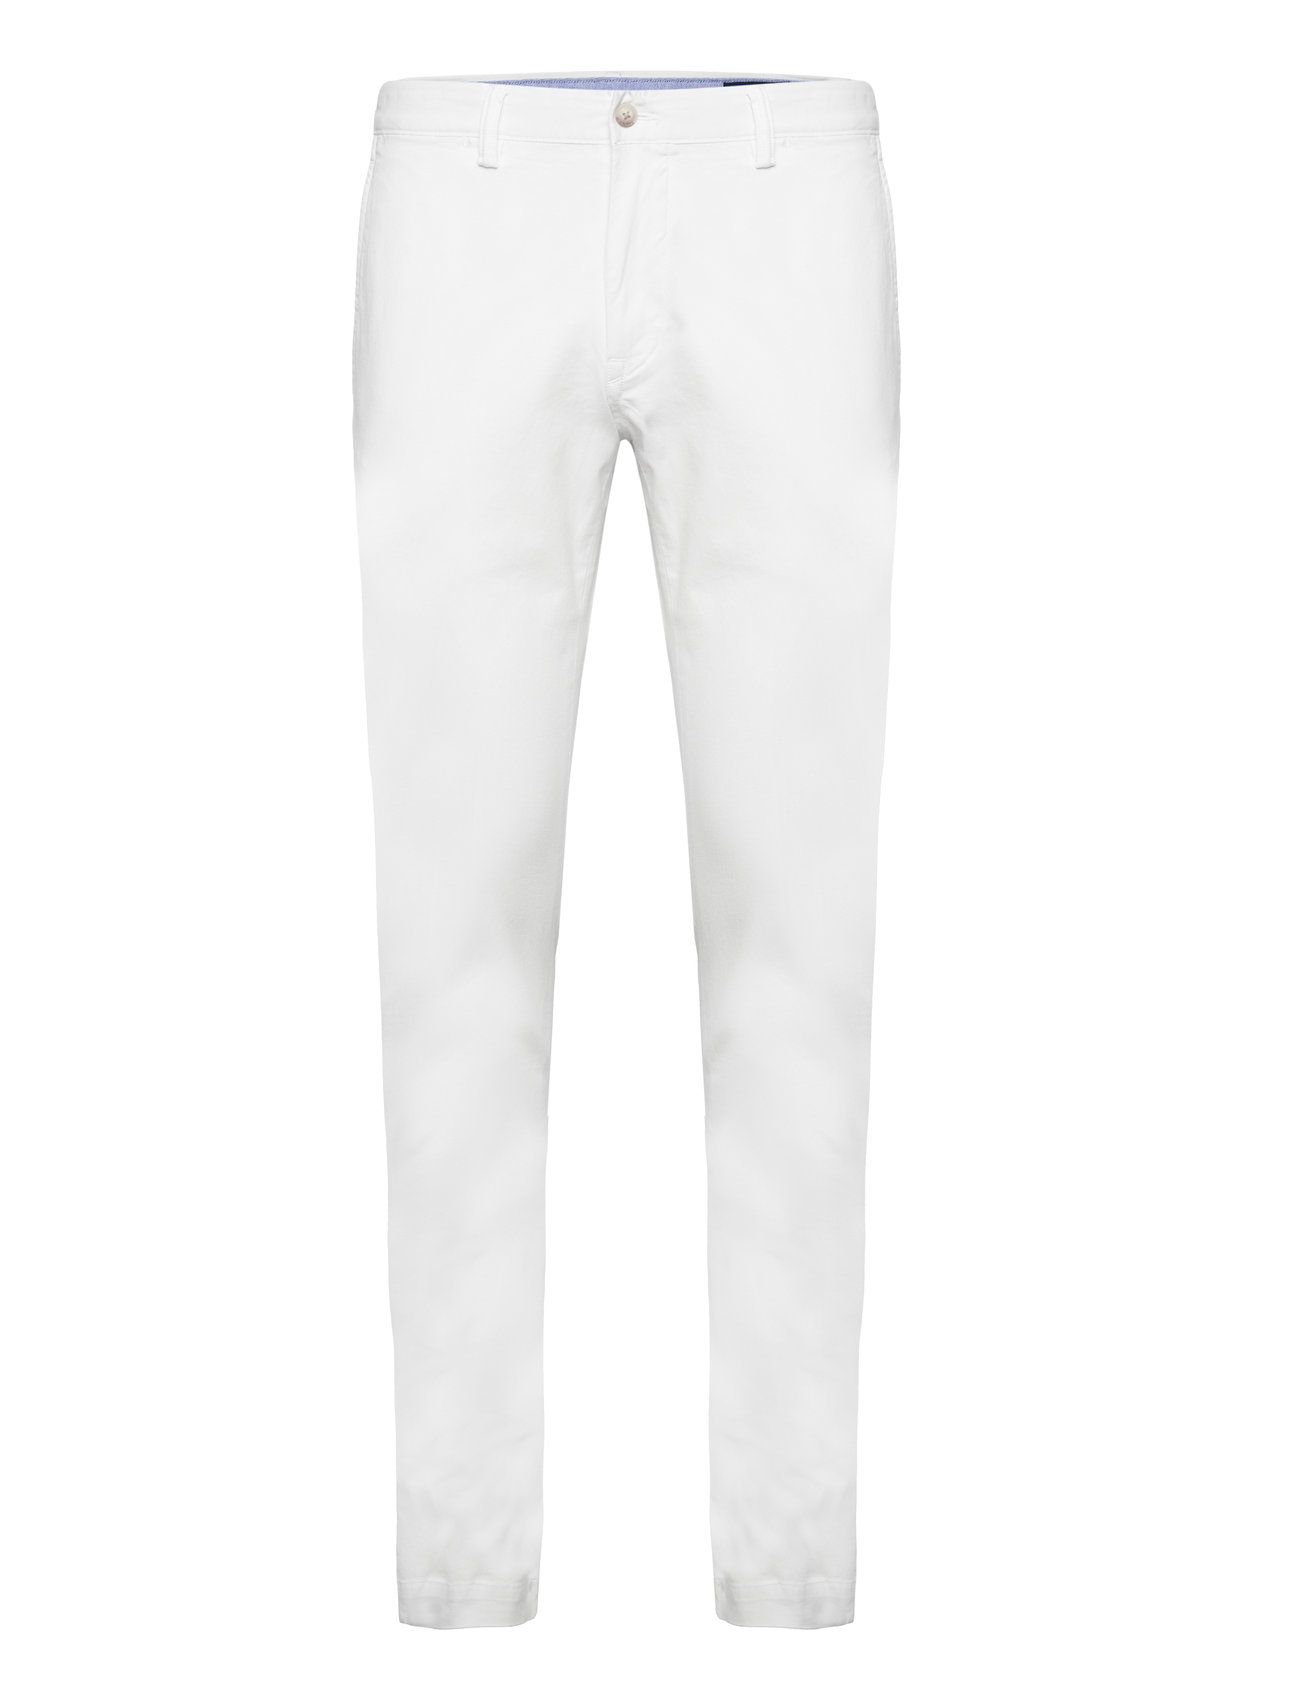 Stretch Slim Fit Washed Chino Pant Bottoms Trousers Chinos White Polo Ralph Lauren